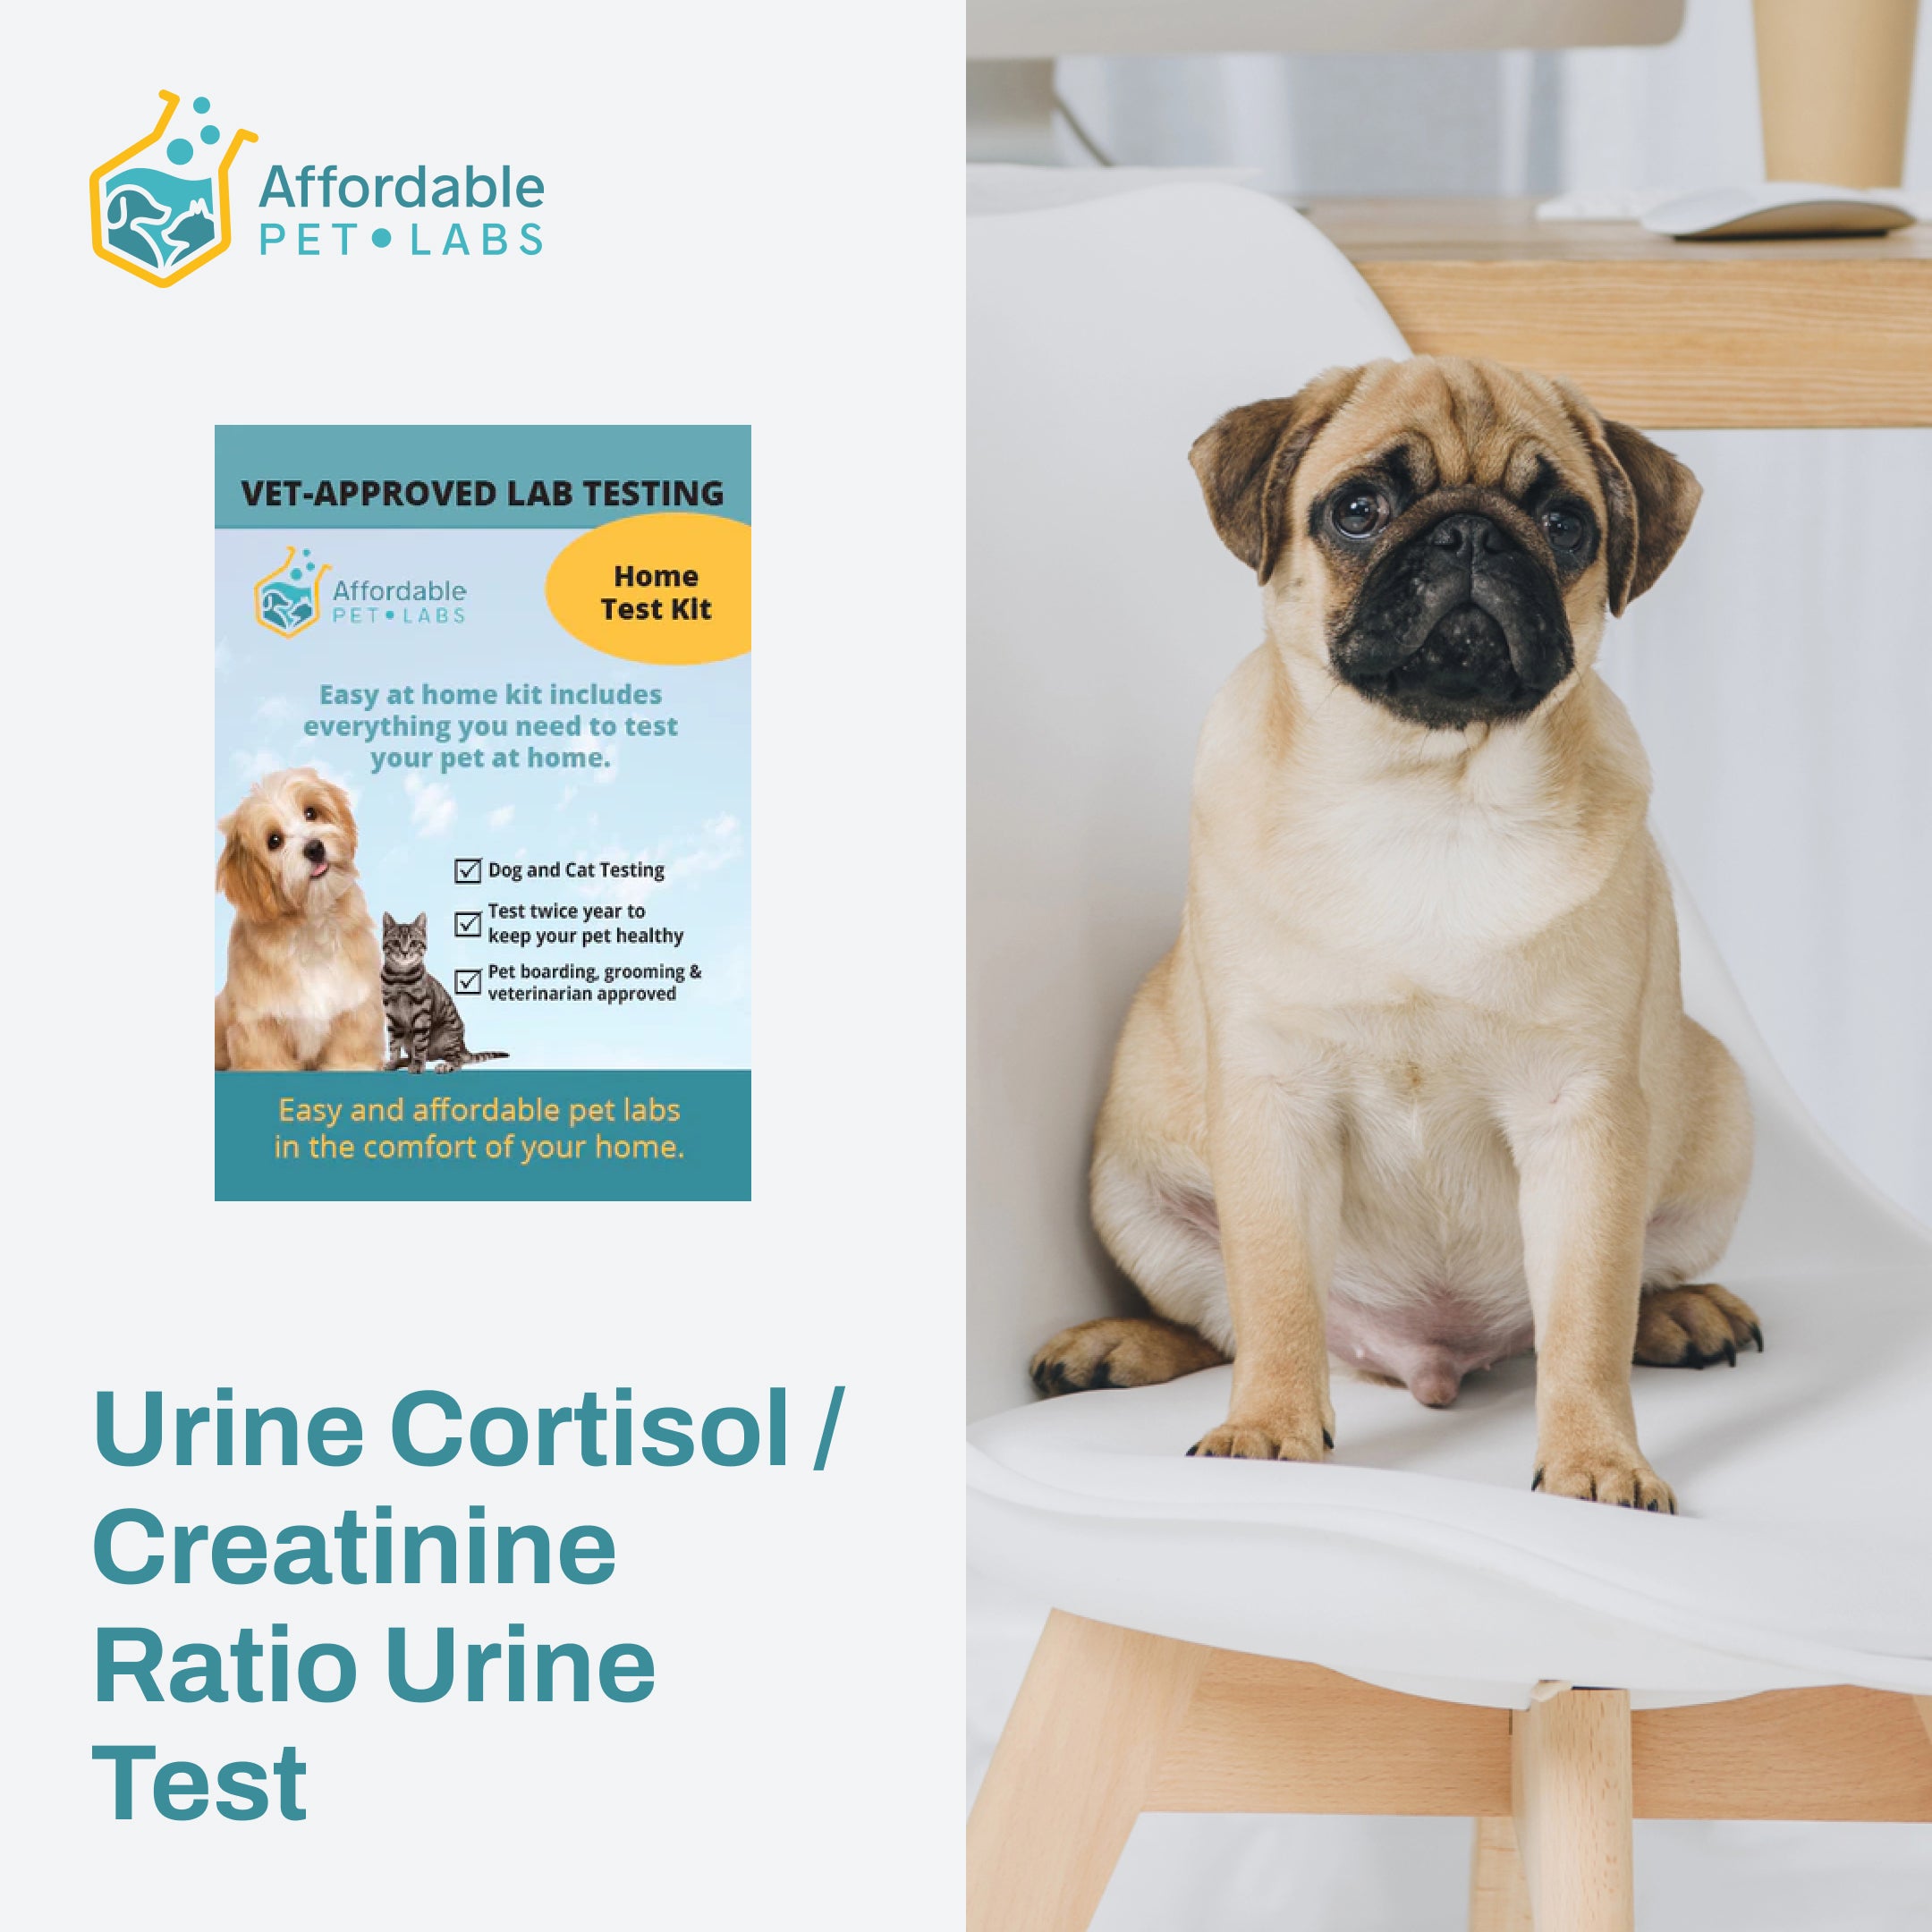 Easy Home Kit: Affordable Pet Labs Urine Cortisol / Creatinine Ratio Urine Test For Dogs